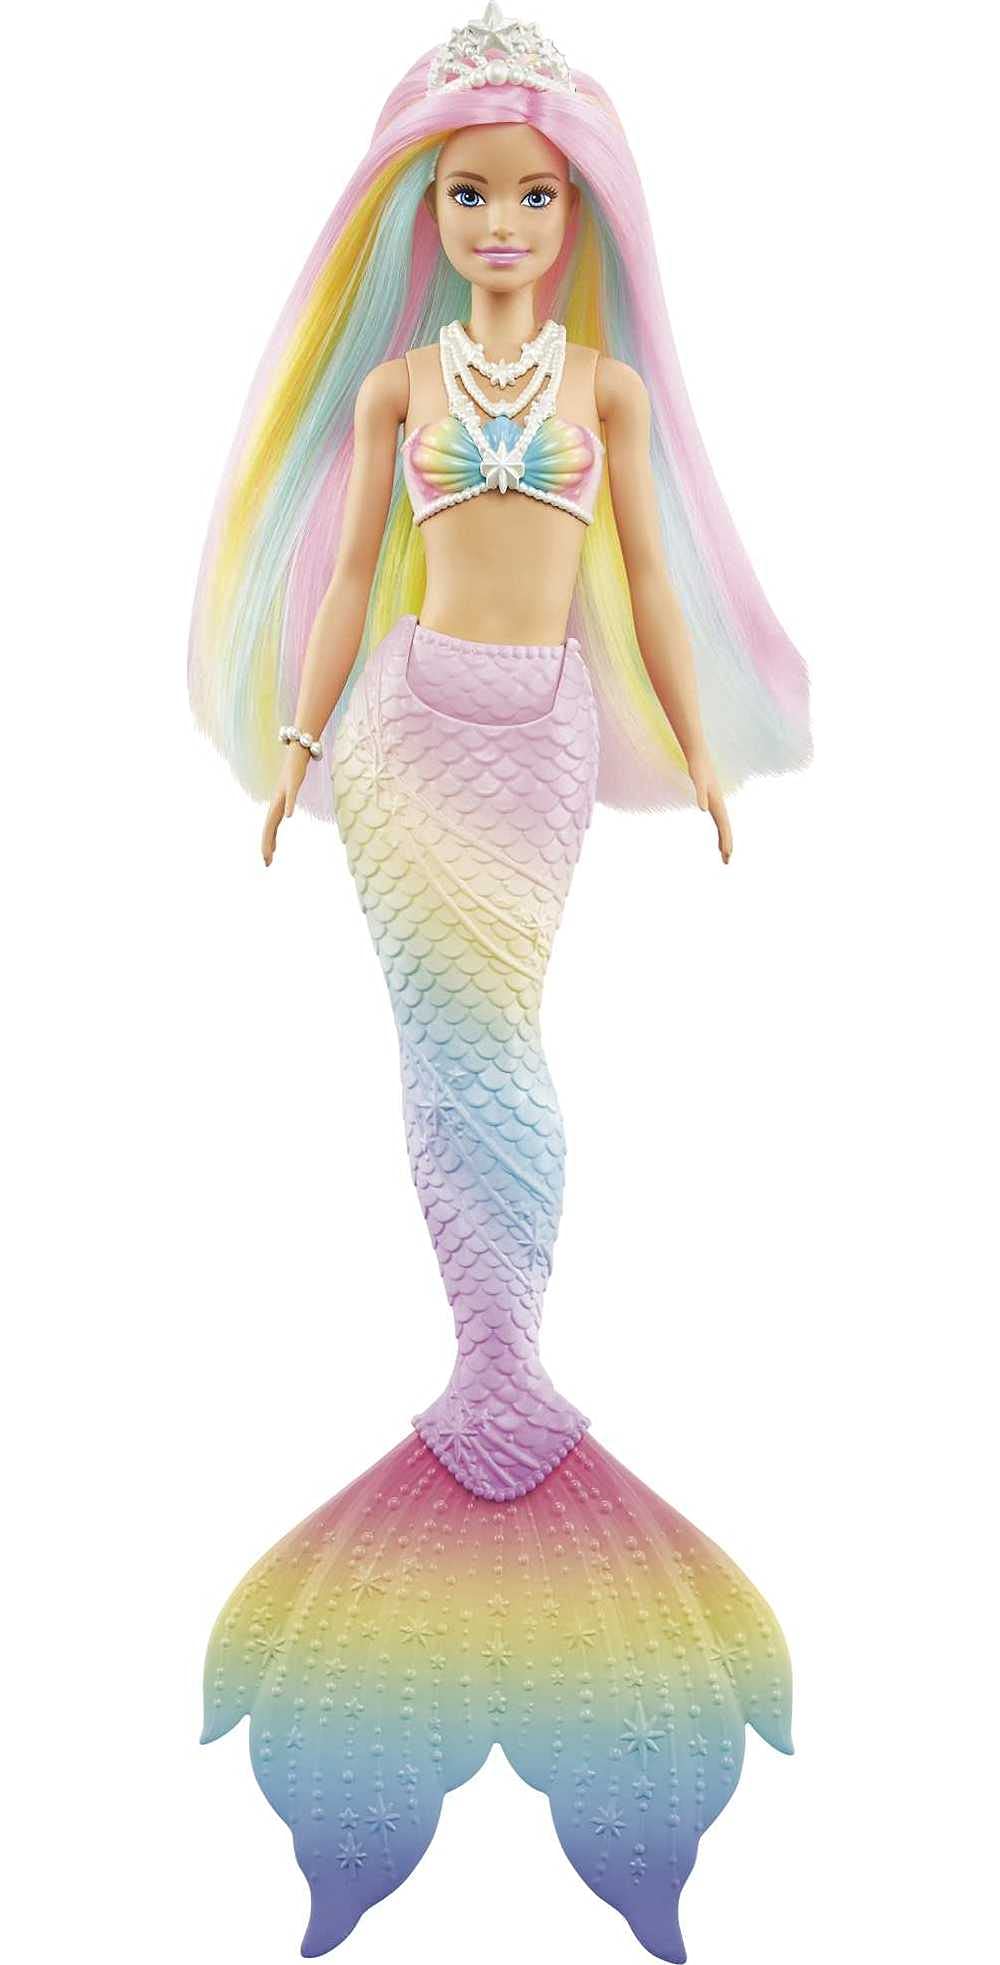 Barbie Dreamtopia Rainbow Magic Mermaid Doll with Rainbow Hair and Water-Activated Color Change Feature, Gift for 3 to 7 Year Olds , Blond